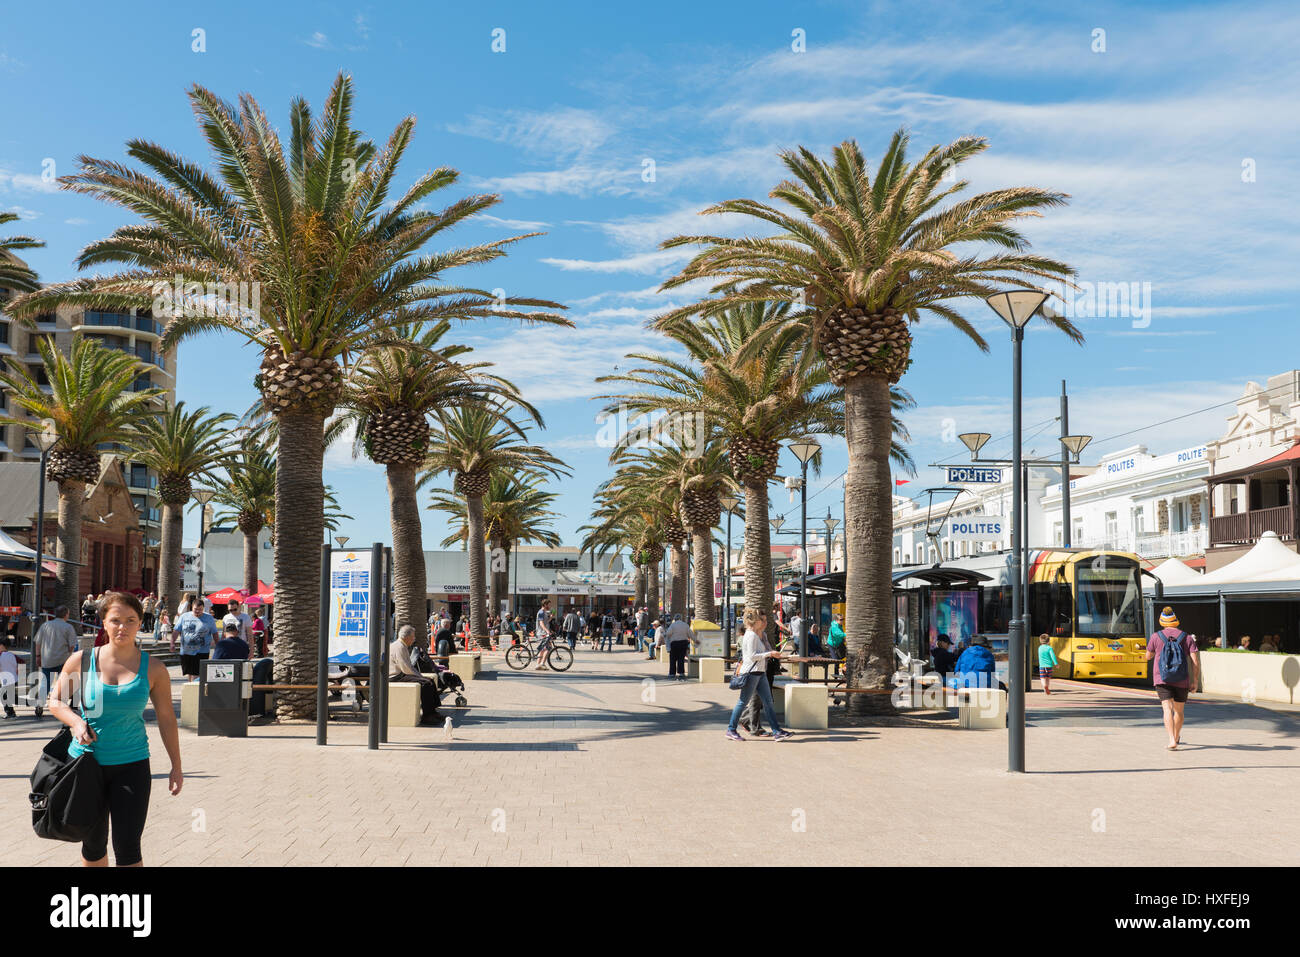 Shoppers and tourists in Moseley square at Adelaide's beachside suburb of Glenelg, South Australia Stock Photo